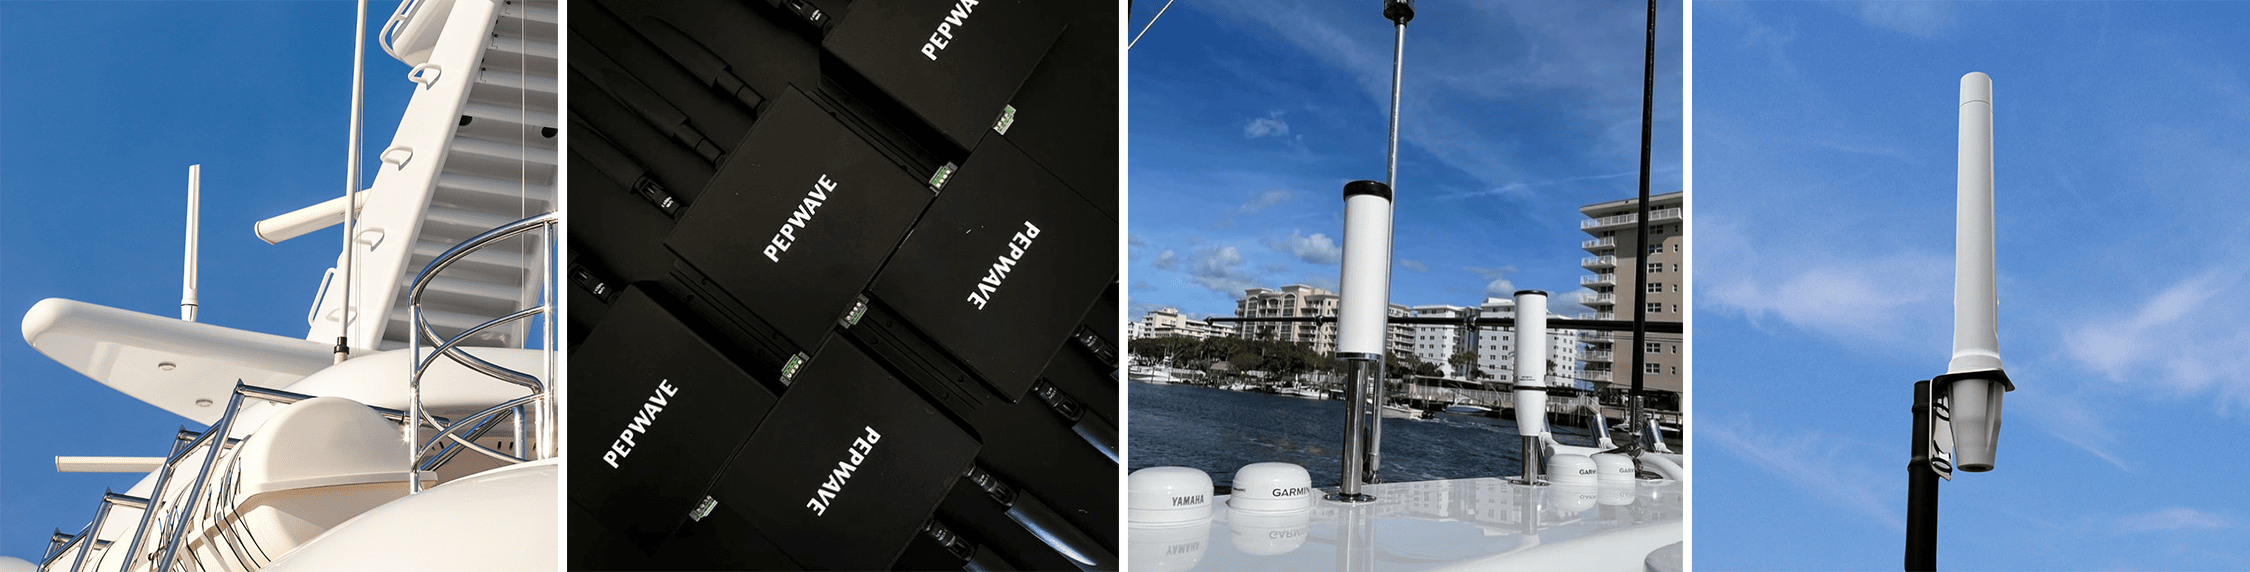 Marine WiFi Boosters | Marine Cellular Signal Boosters